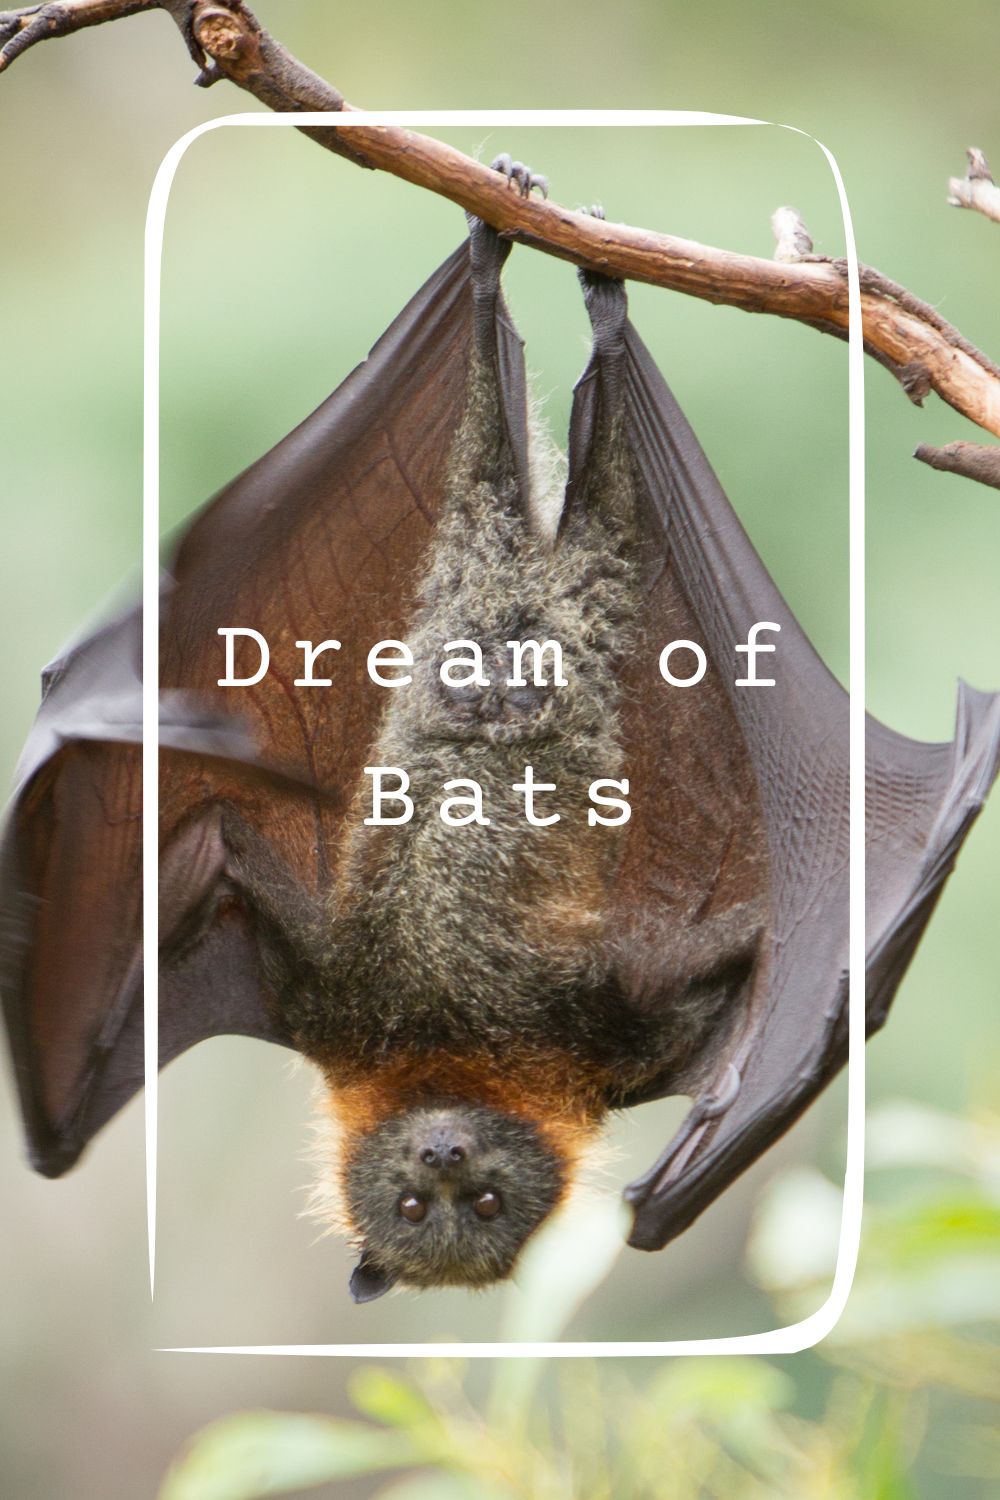 15 Dream of Bats Meanings1